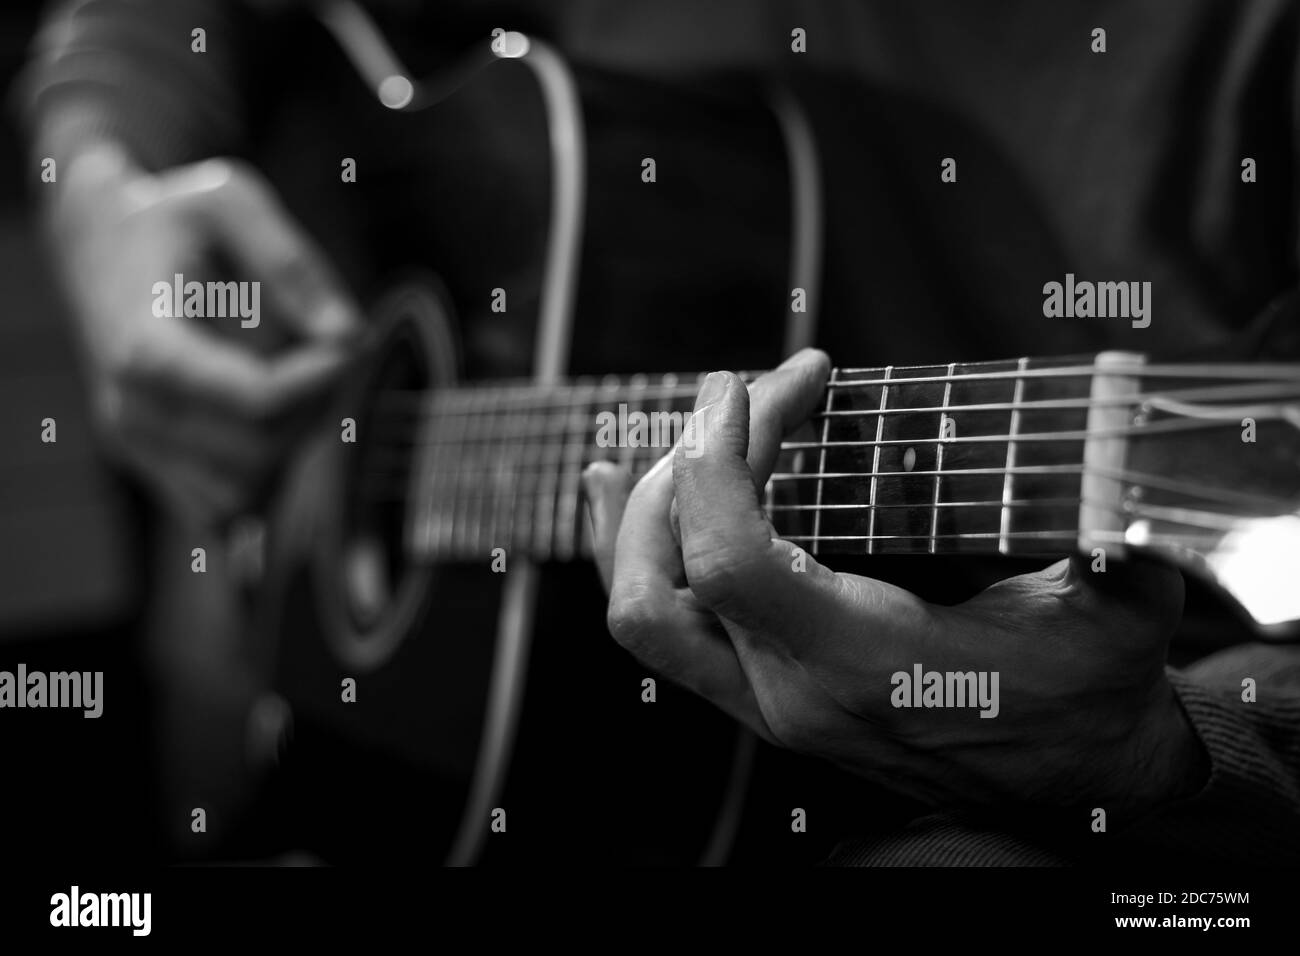 Close up view of hands playing acoustic western guitar. Black and white image. Stock Photo